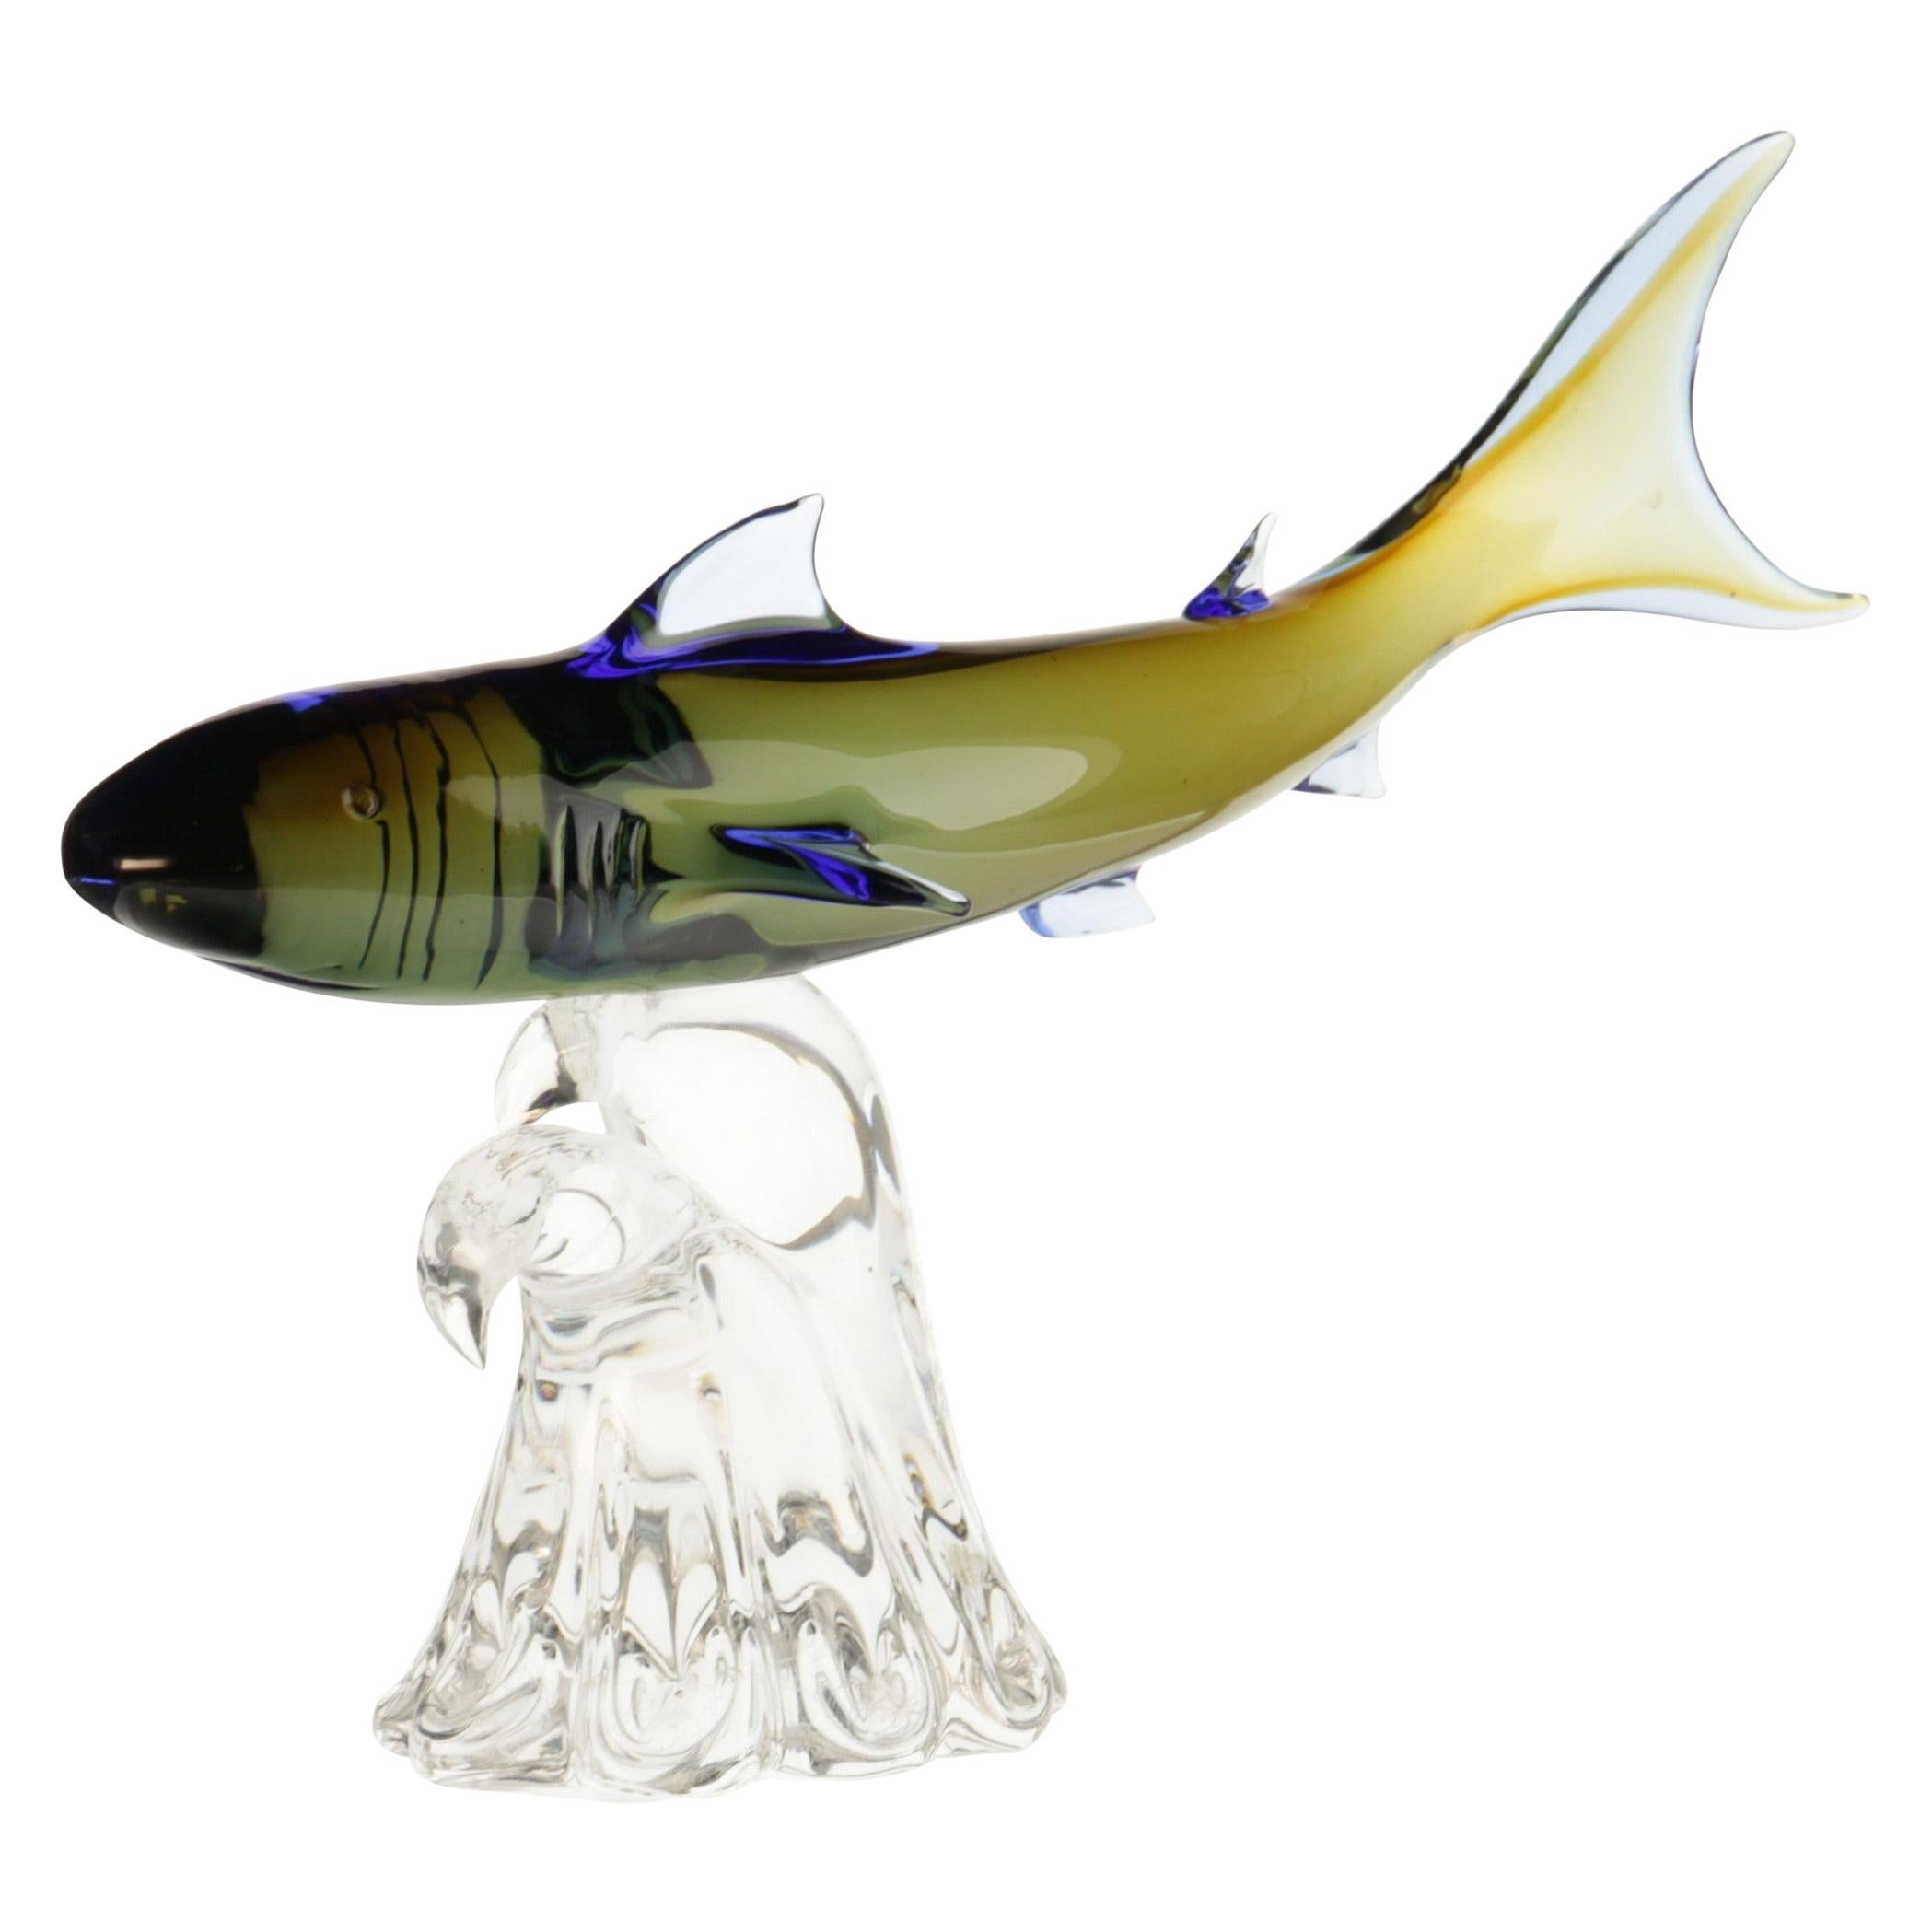 Roberto Camozzo for Wyland, Hunting Shark on a Base, Murano Glass 1990s, Signed